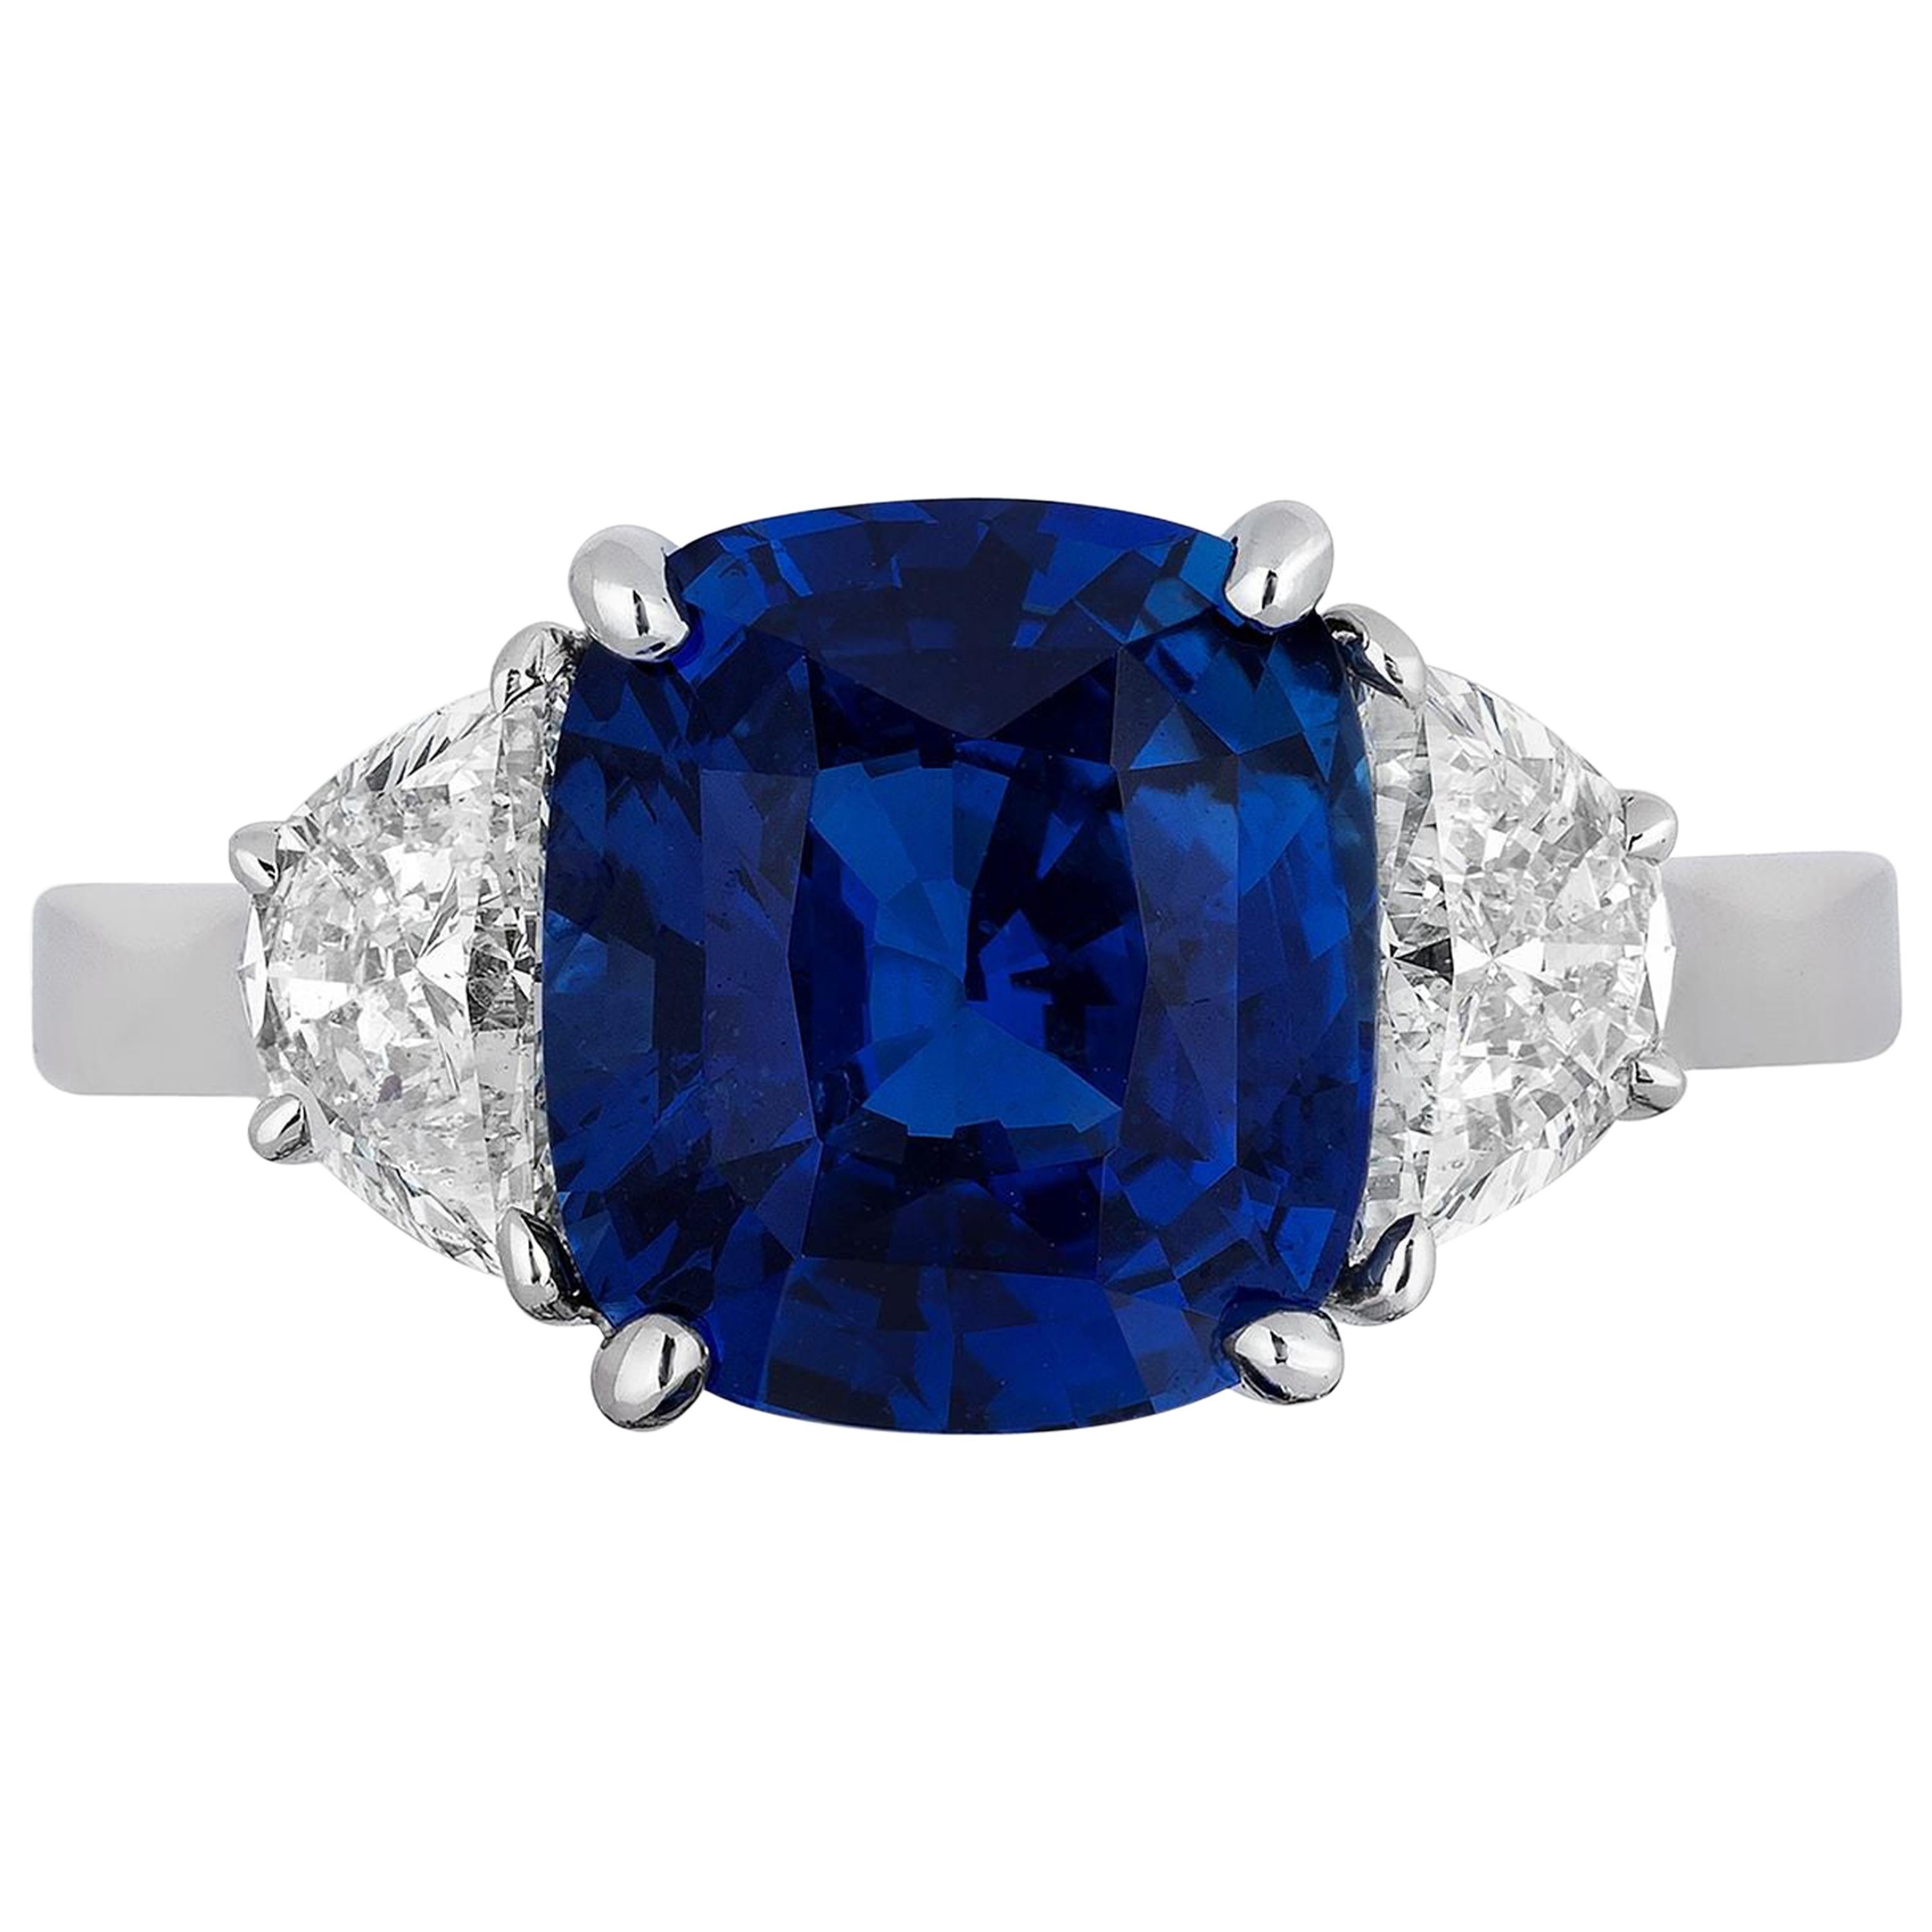 4.01 Carat Emerald Cut Blue Sapphire and Diamond Ring For Sale at 1stDibs